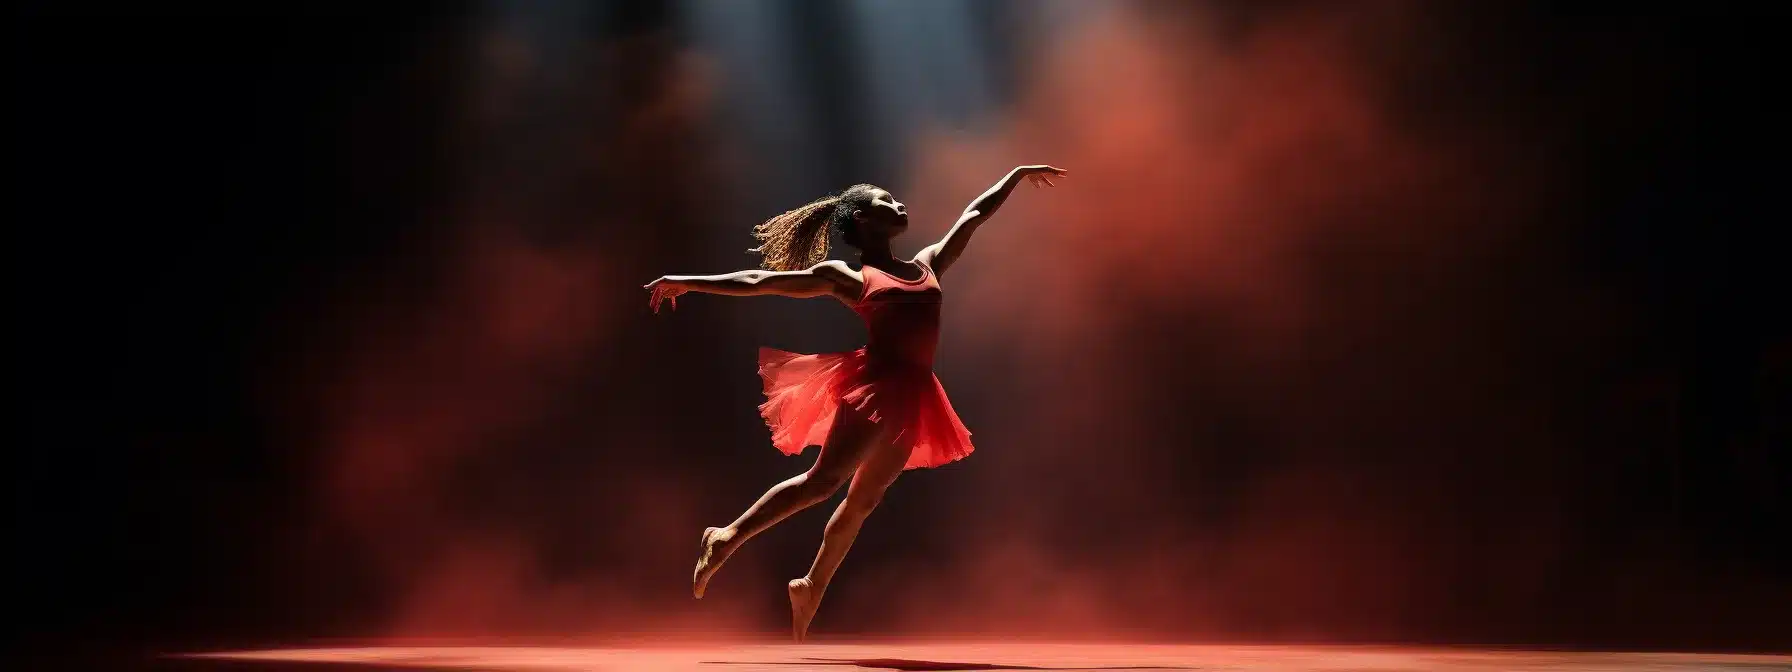 A Dancer Gracefully Performing On A Vibrant Stage, Captivating The Audience With Their Dynamic Routine.